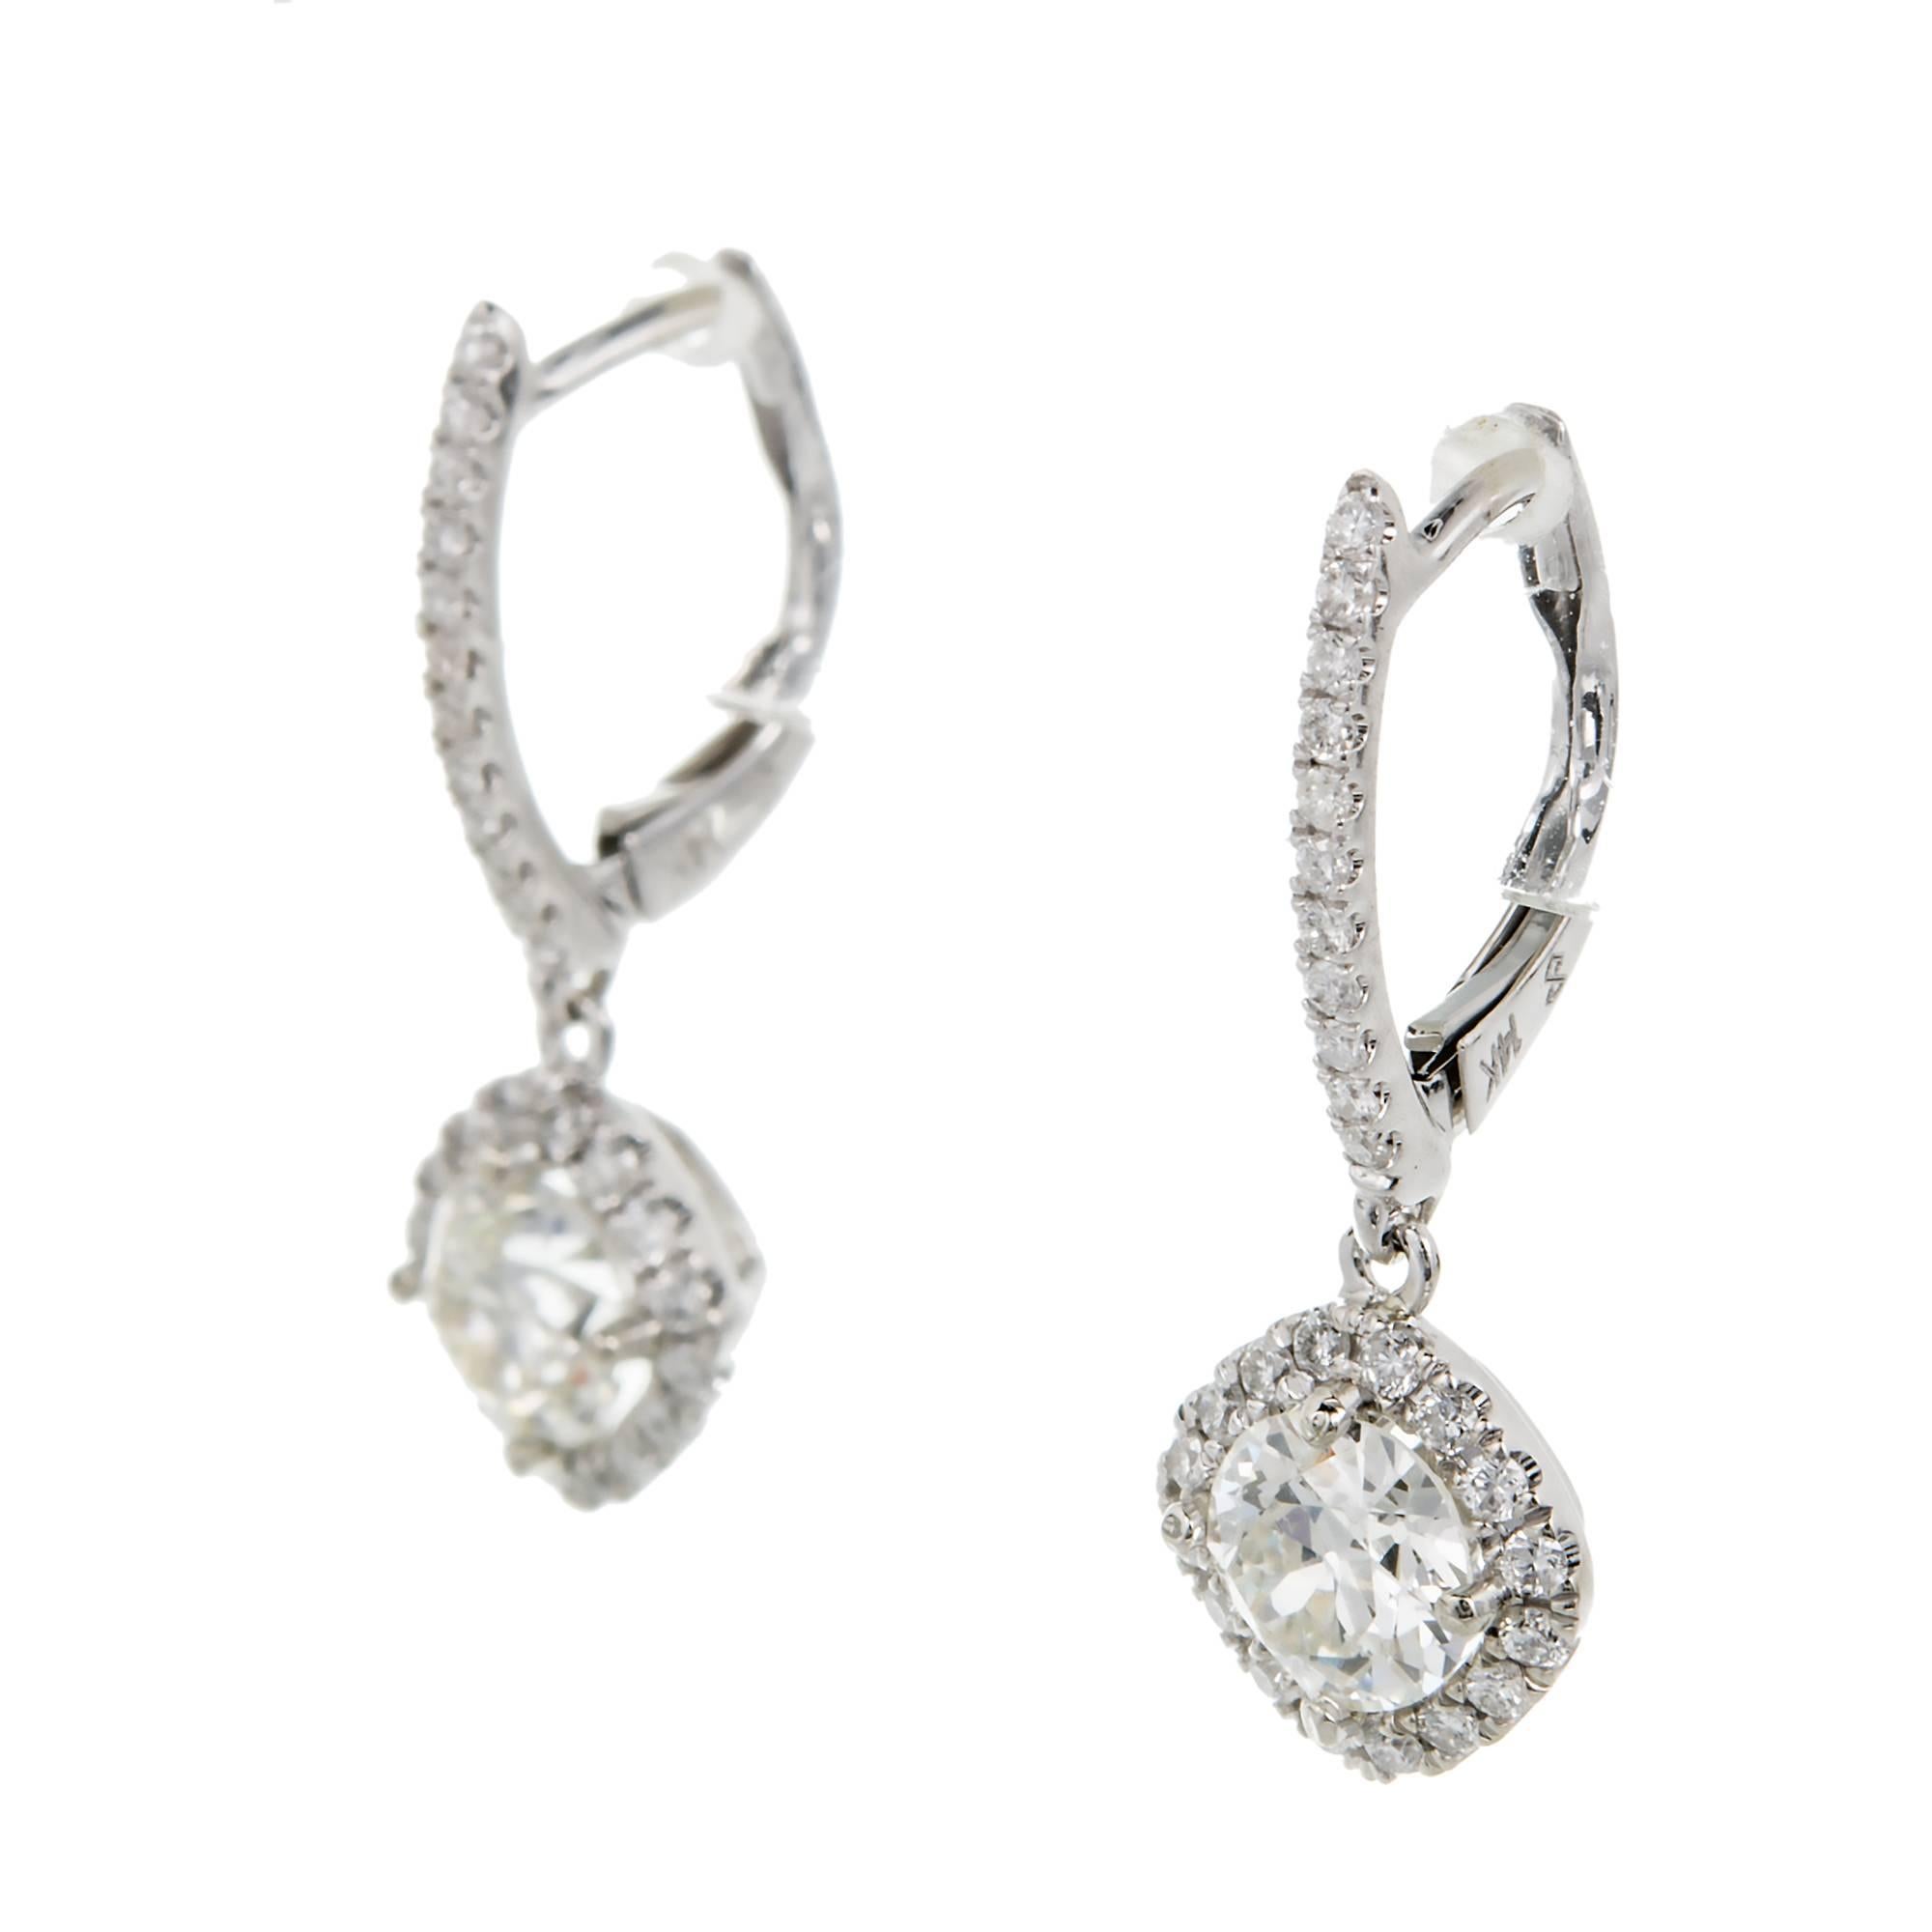 Peter Suchy cushion halo dangle 14kt white gold dangle earrings old European cut sparkly center Diamonds surrounded by bright full cut Diamonds.

2 old European cut Diamonds, approx. total weight 1.02cts, I, SI1
54 round full cut Diamonds, approx.